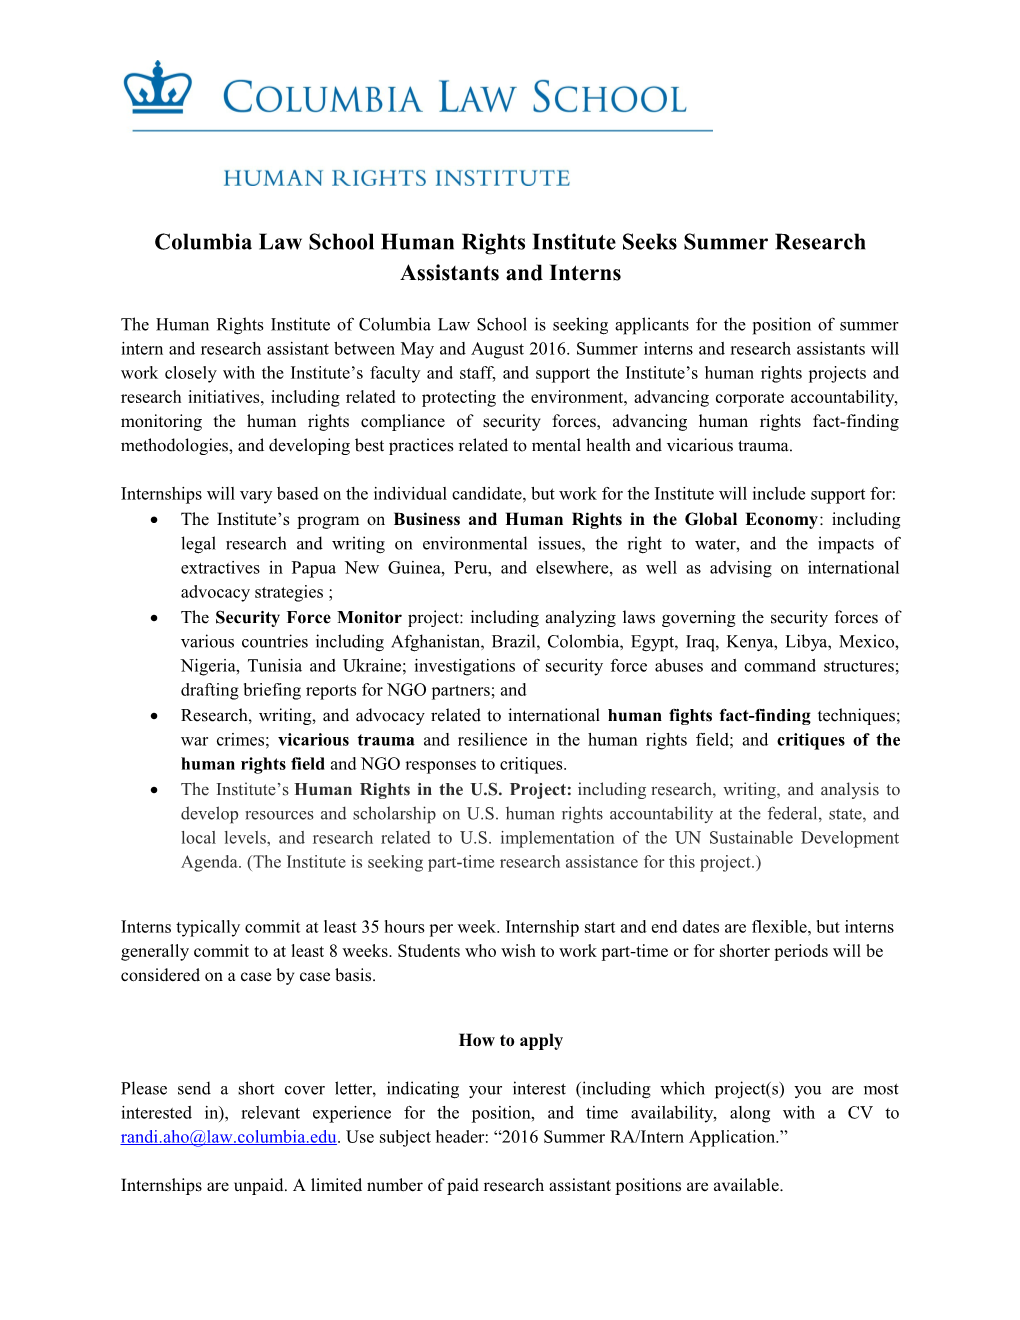 Columbia Law School Human Rights Institute Seeks Summer Research Assistants and Interns